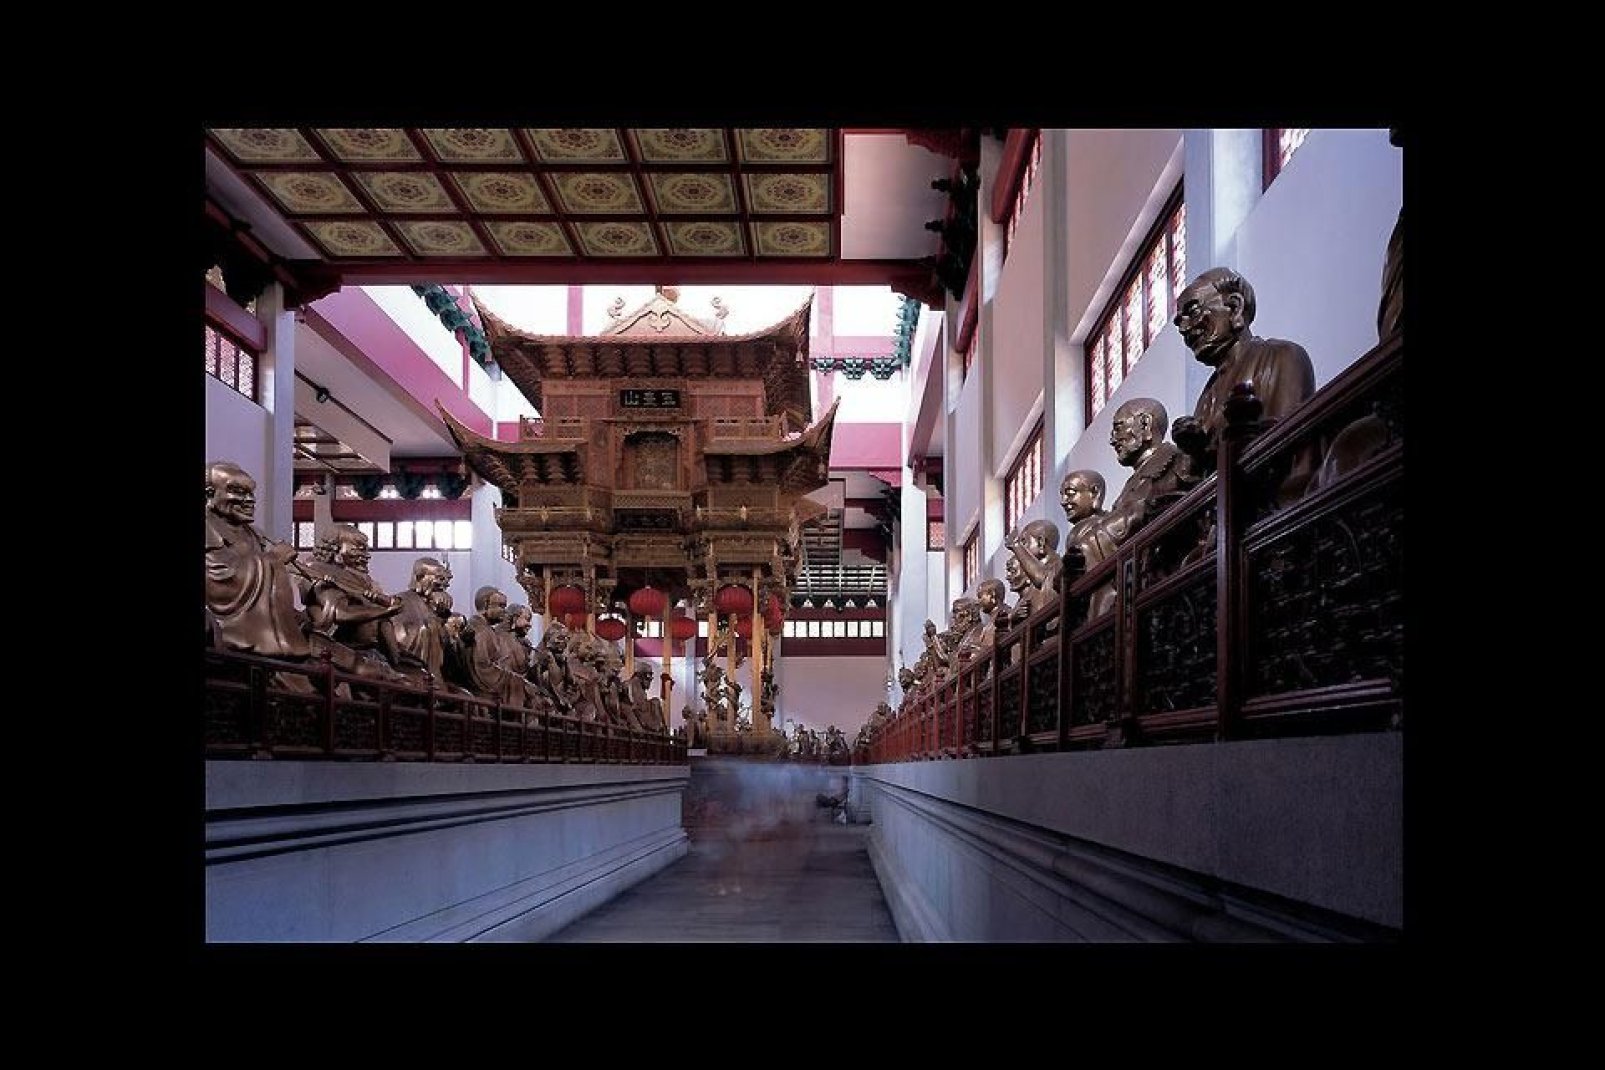 You can admire Arhats Hall in the Lingyin Temple, which is also called the Temple of the Soul's Retreat.